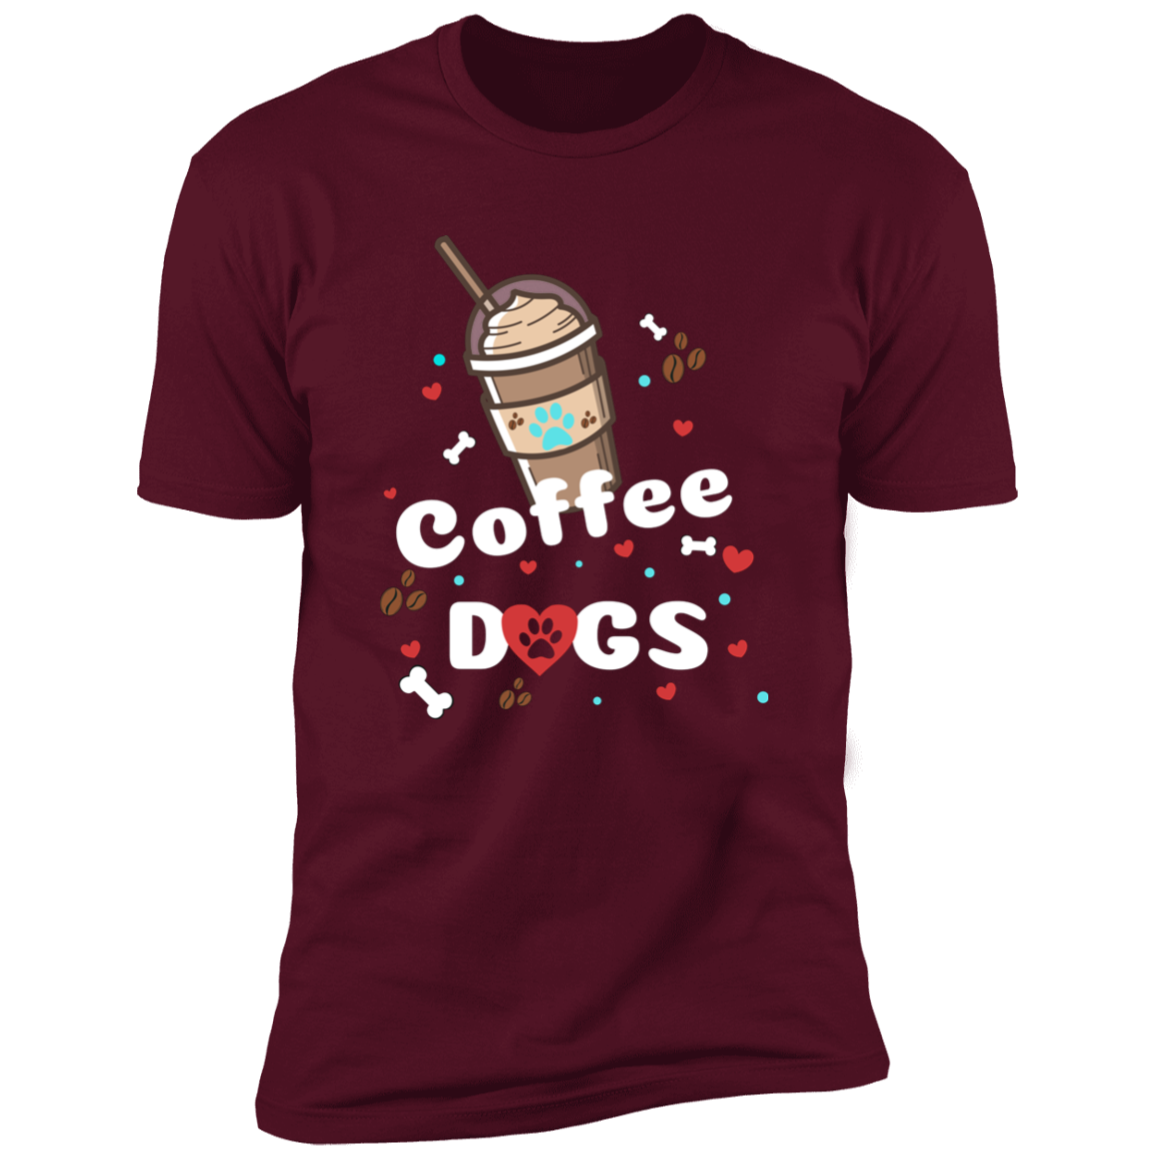 Blended Coffee Dogs T-shirt, Dog Shirt for humans, in maroon